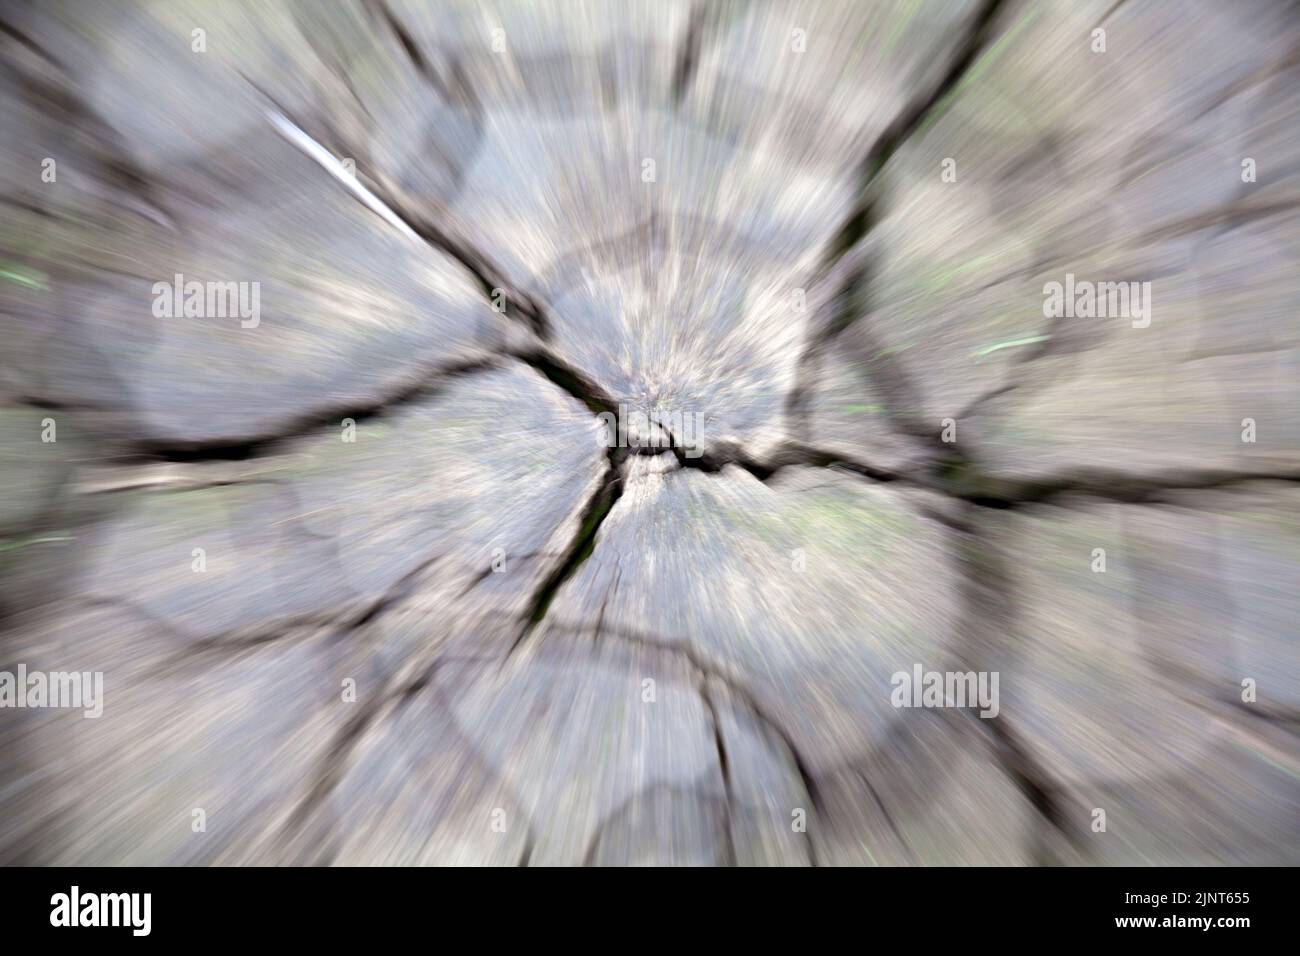 A ICM photo looking down at the cracks in the mud at the Snake Pass end of the Ladybower reservoir, Peak district, UK Stock Photo